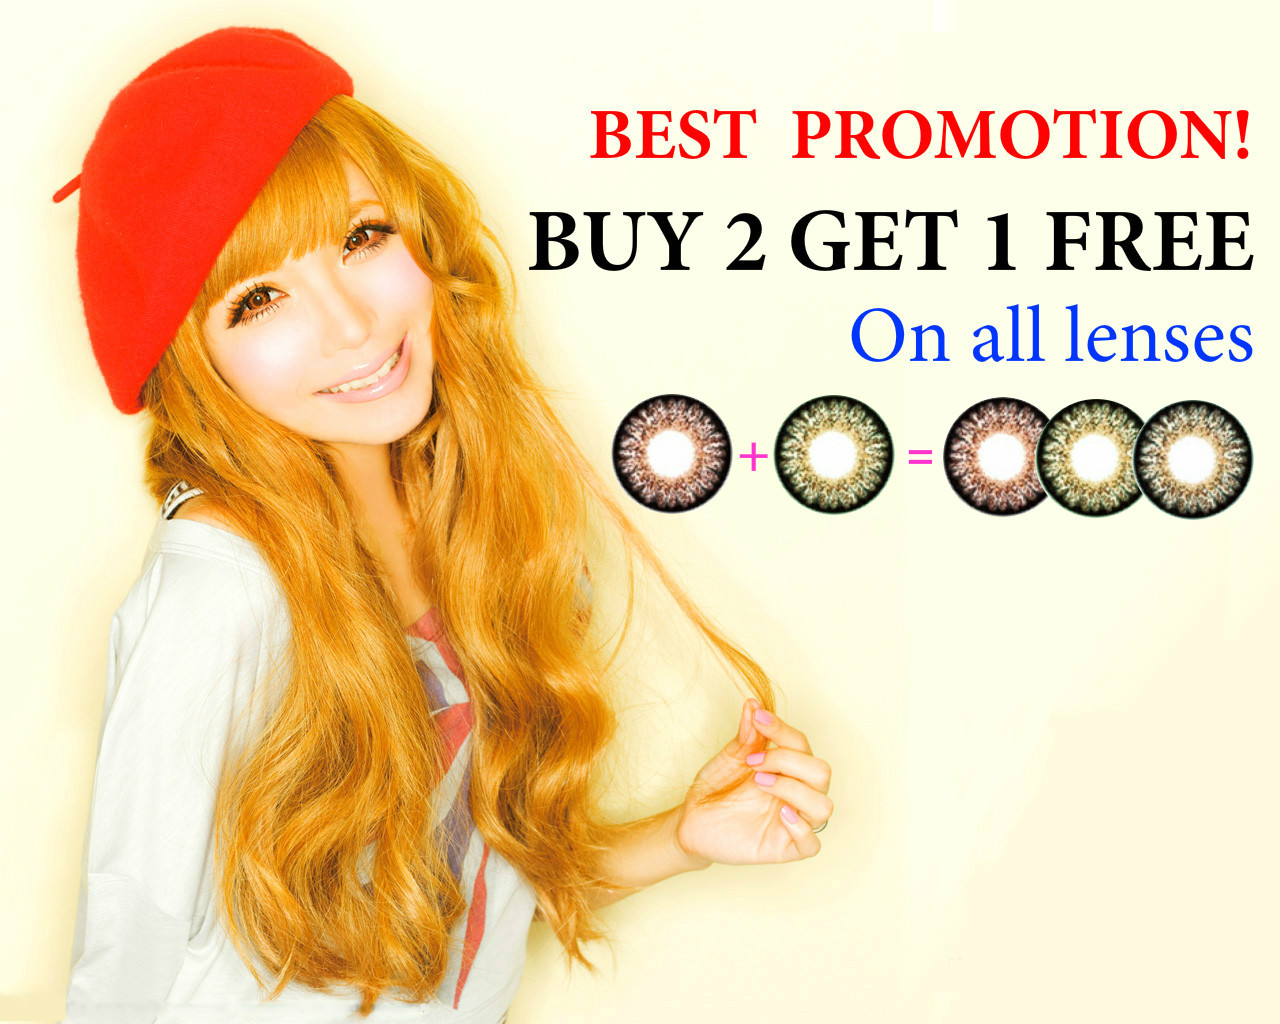 GREAT PROMOTION BUY TWO GET ONE FREE AND FREE WORLDWIDE SHIPPING